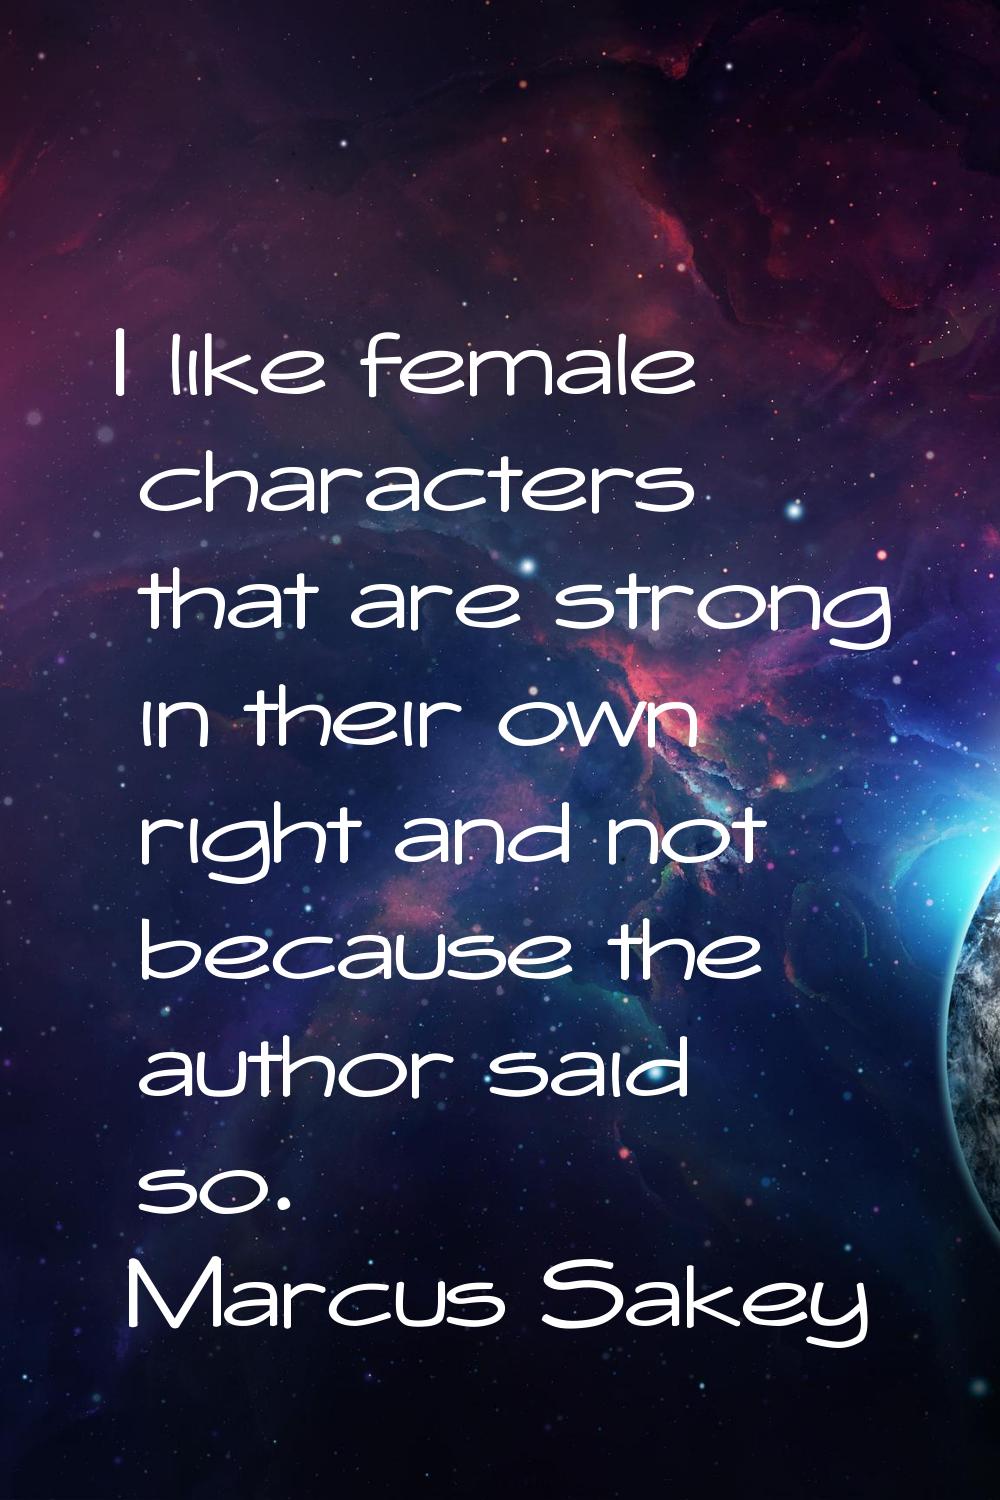 I like female characters that are strong in their own right and not because the author said so.